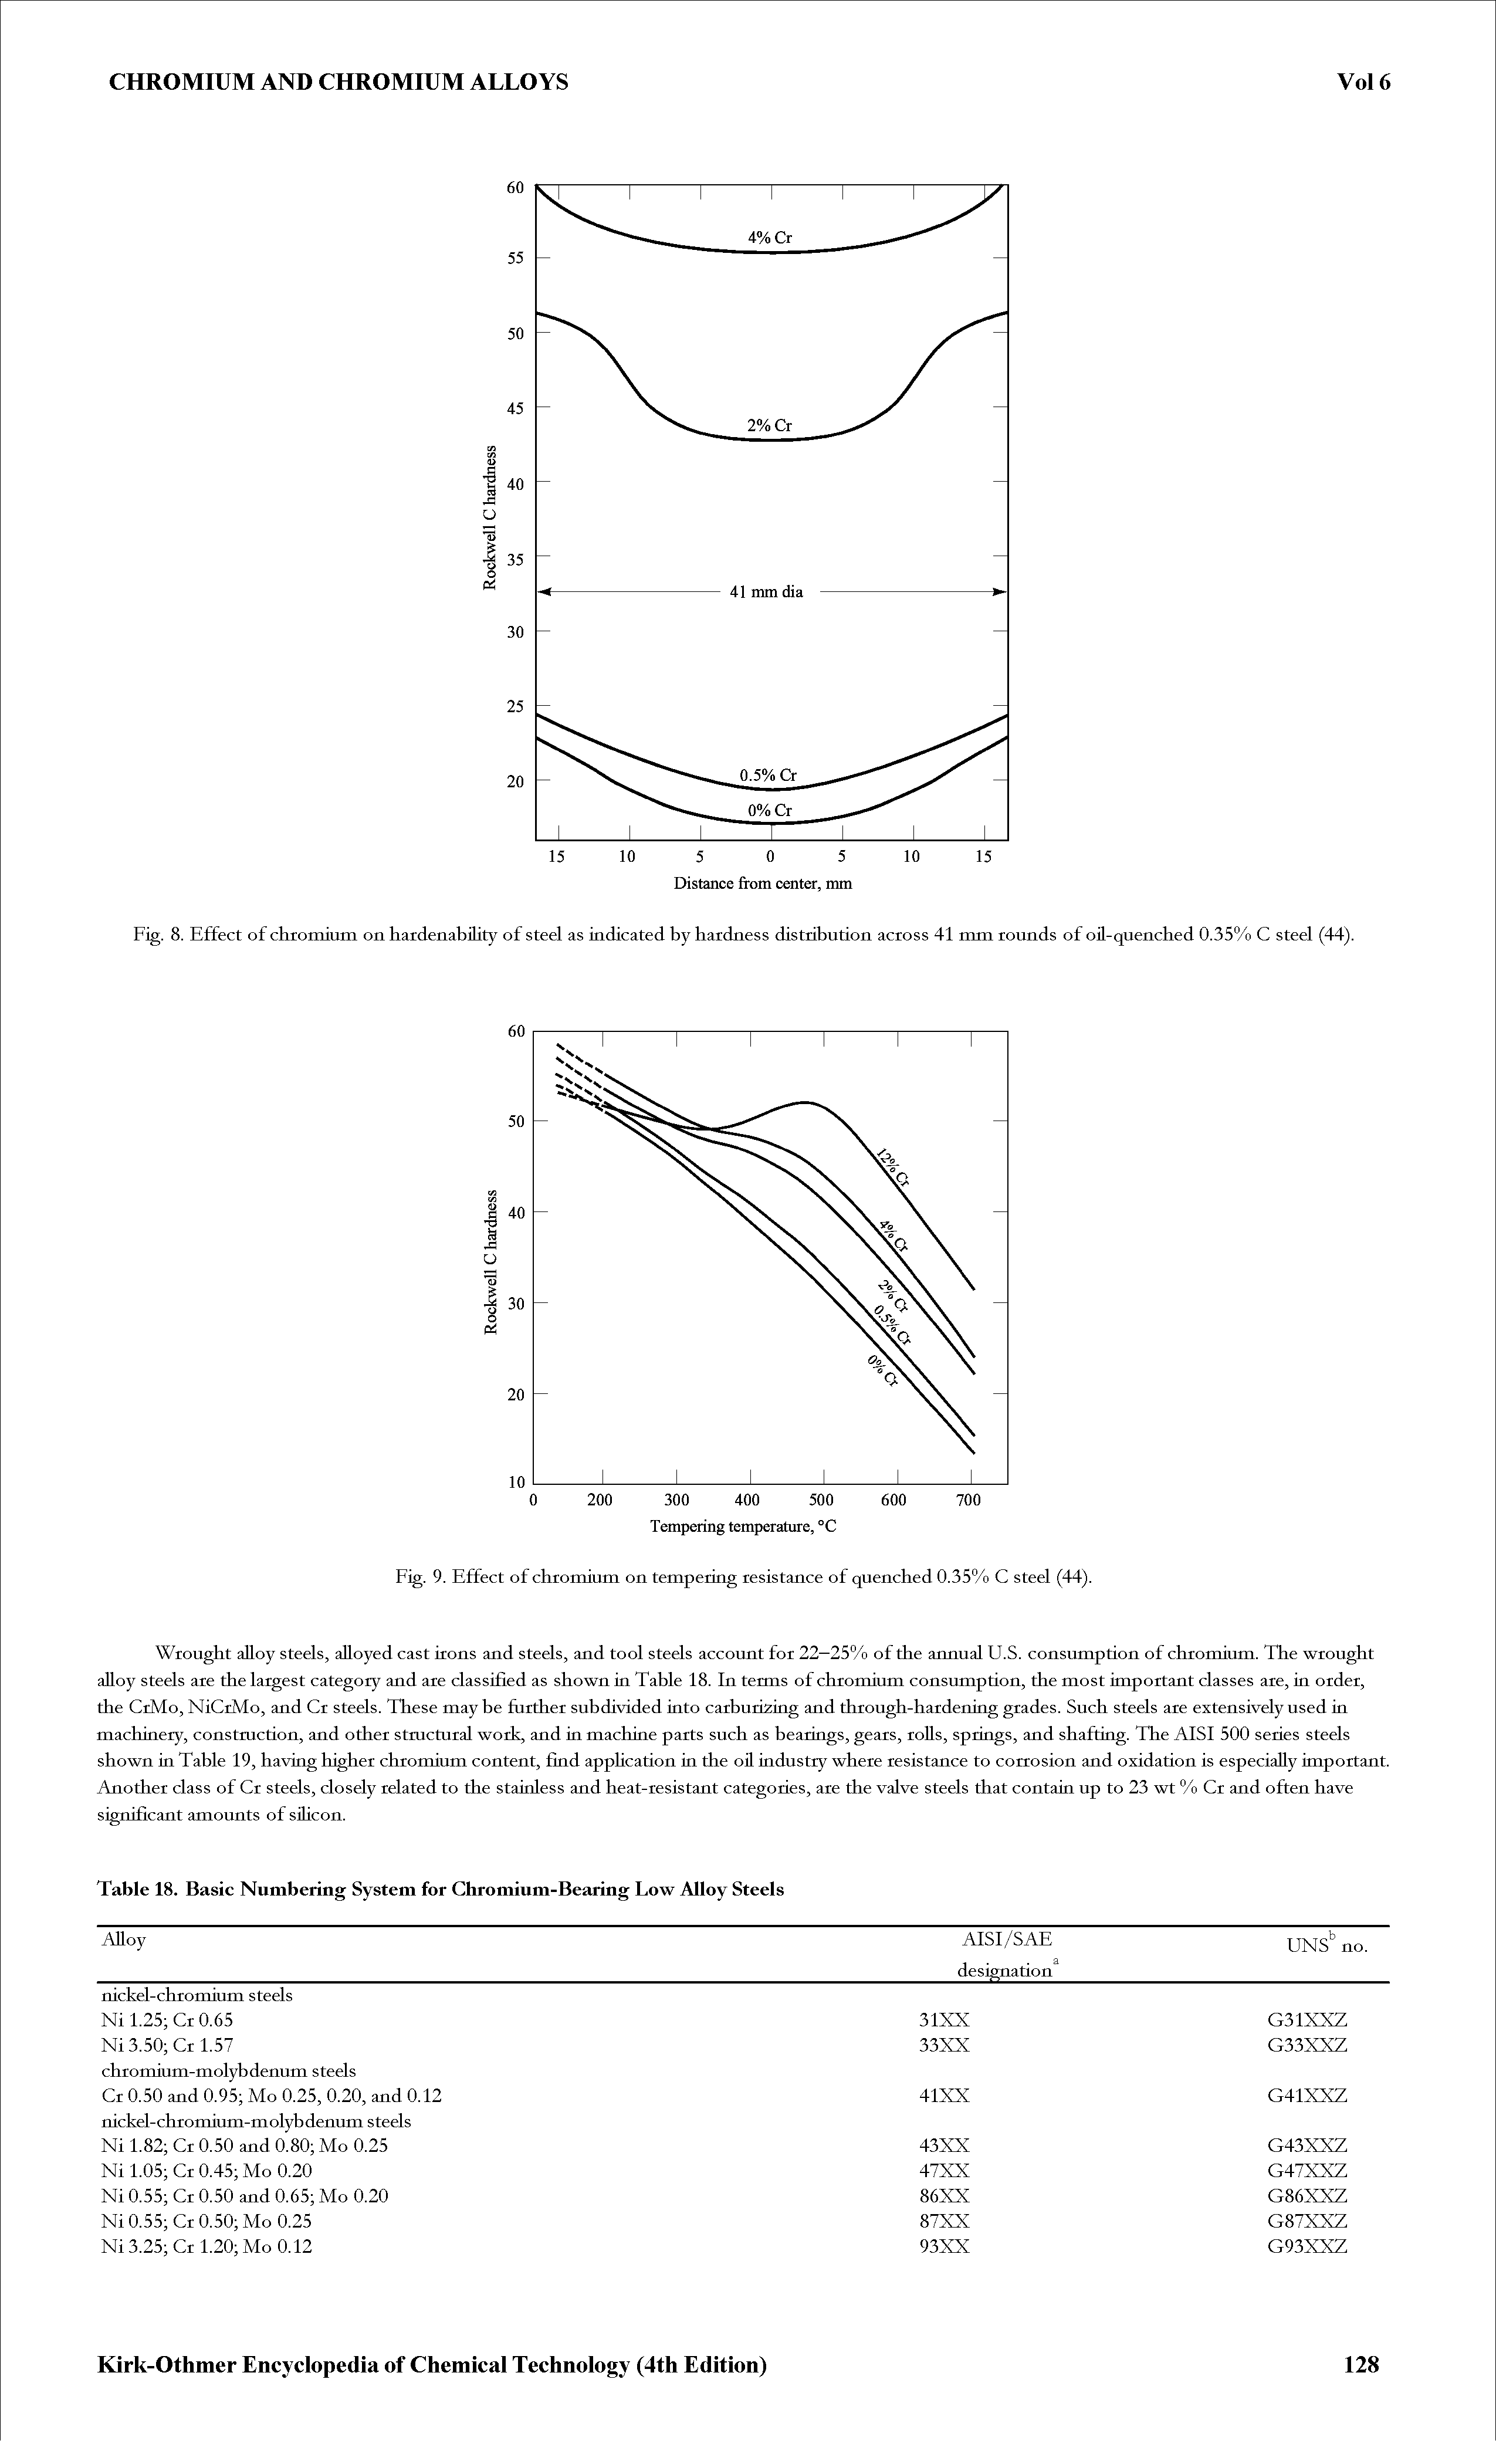 Fig. 8. Effect of chromium on hardenability of steel as indicated by hardness distribution across 41 mm rounds of oil-quenched 0.35% C steel (44).